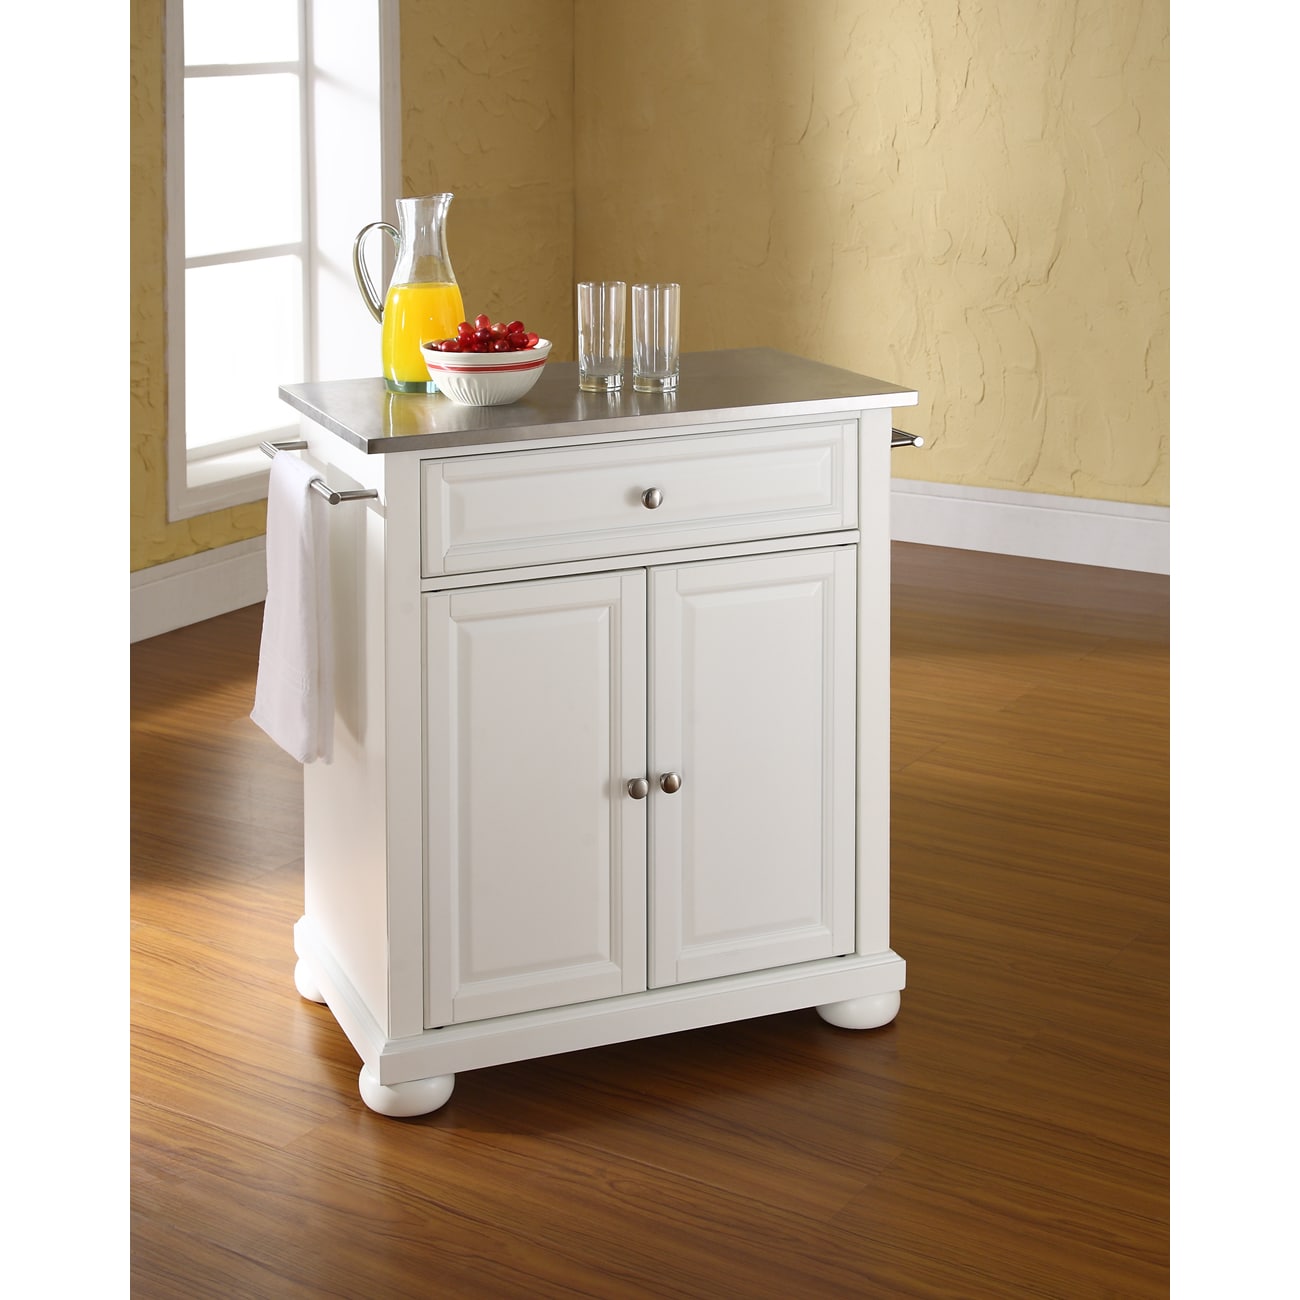 Shop Black Friday Deals On Alexandria White Wood Portable Kitchen Island With Stainless Steel Top On Sale Overstock 15975805